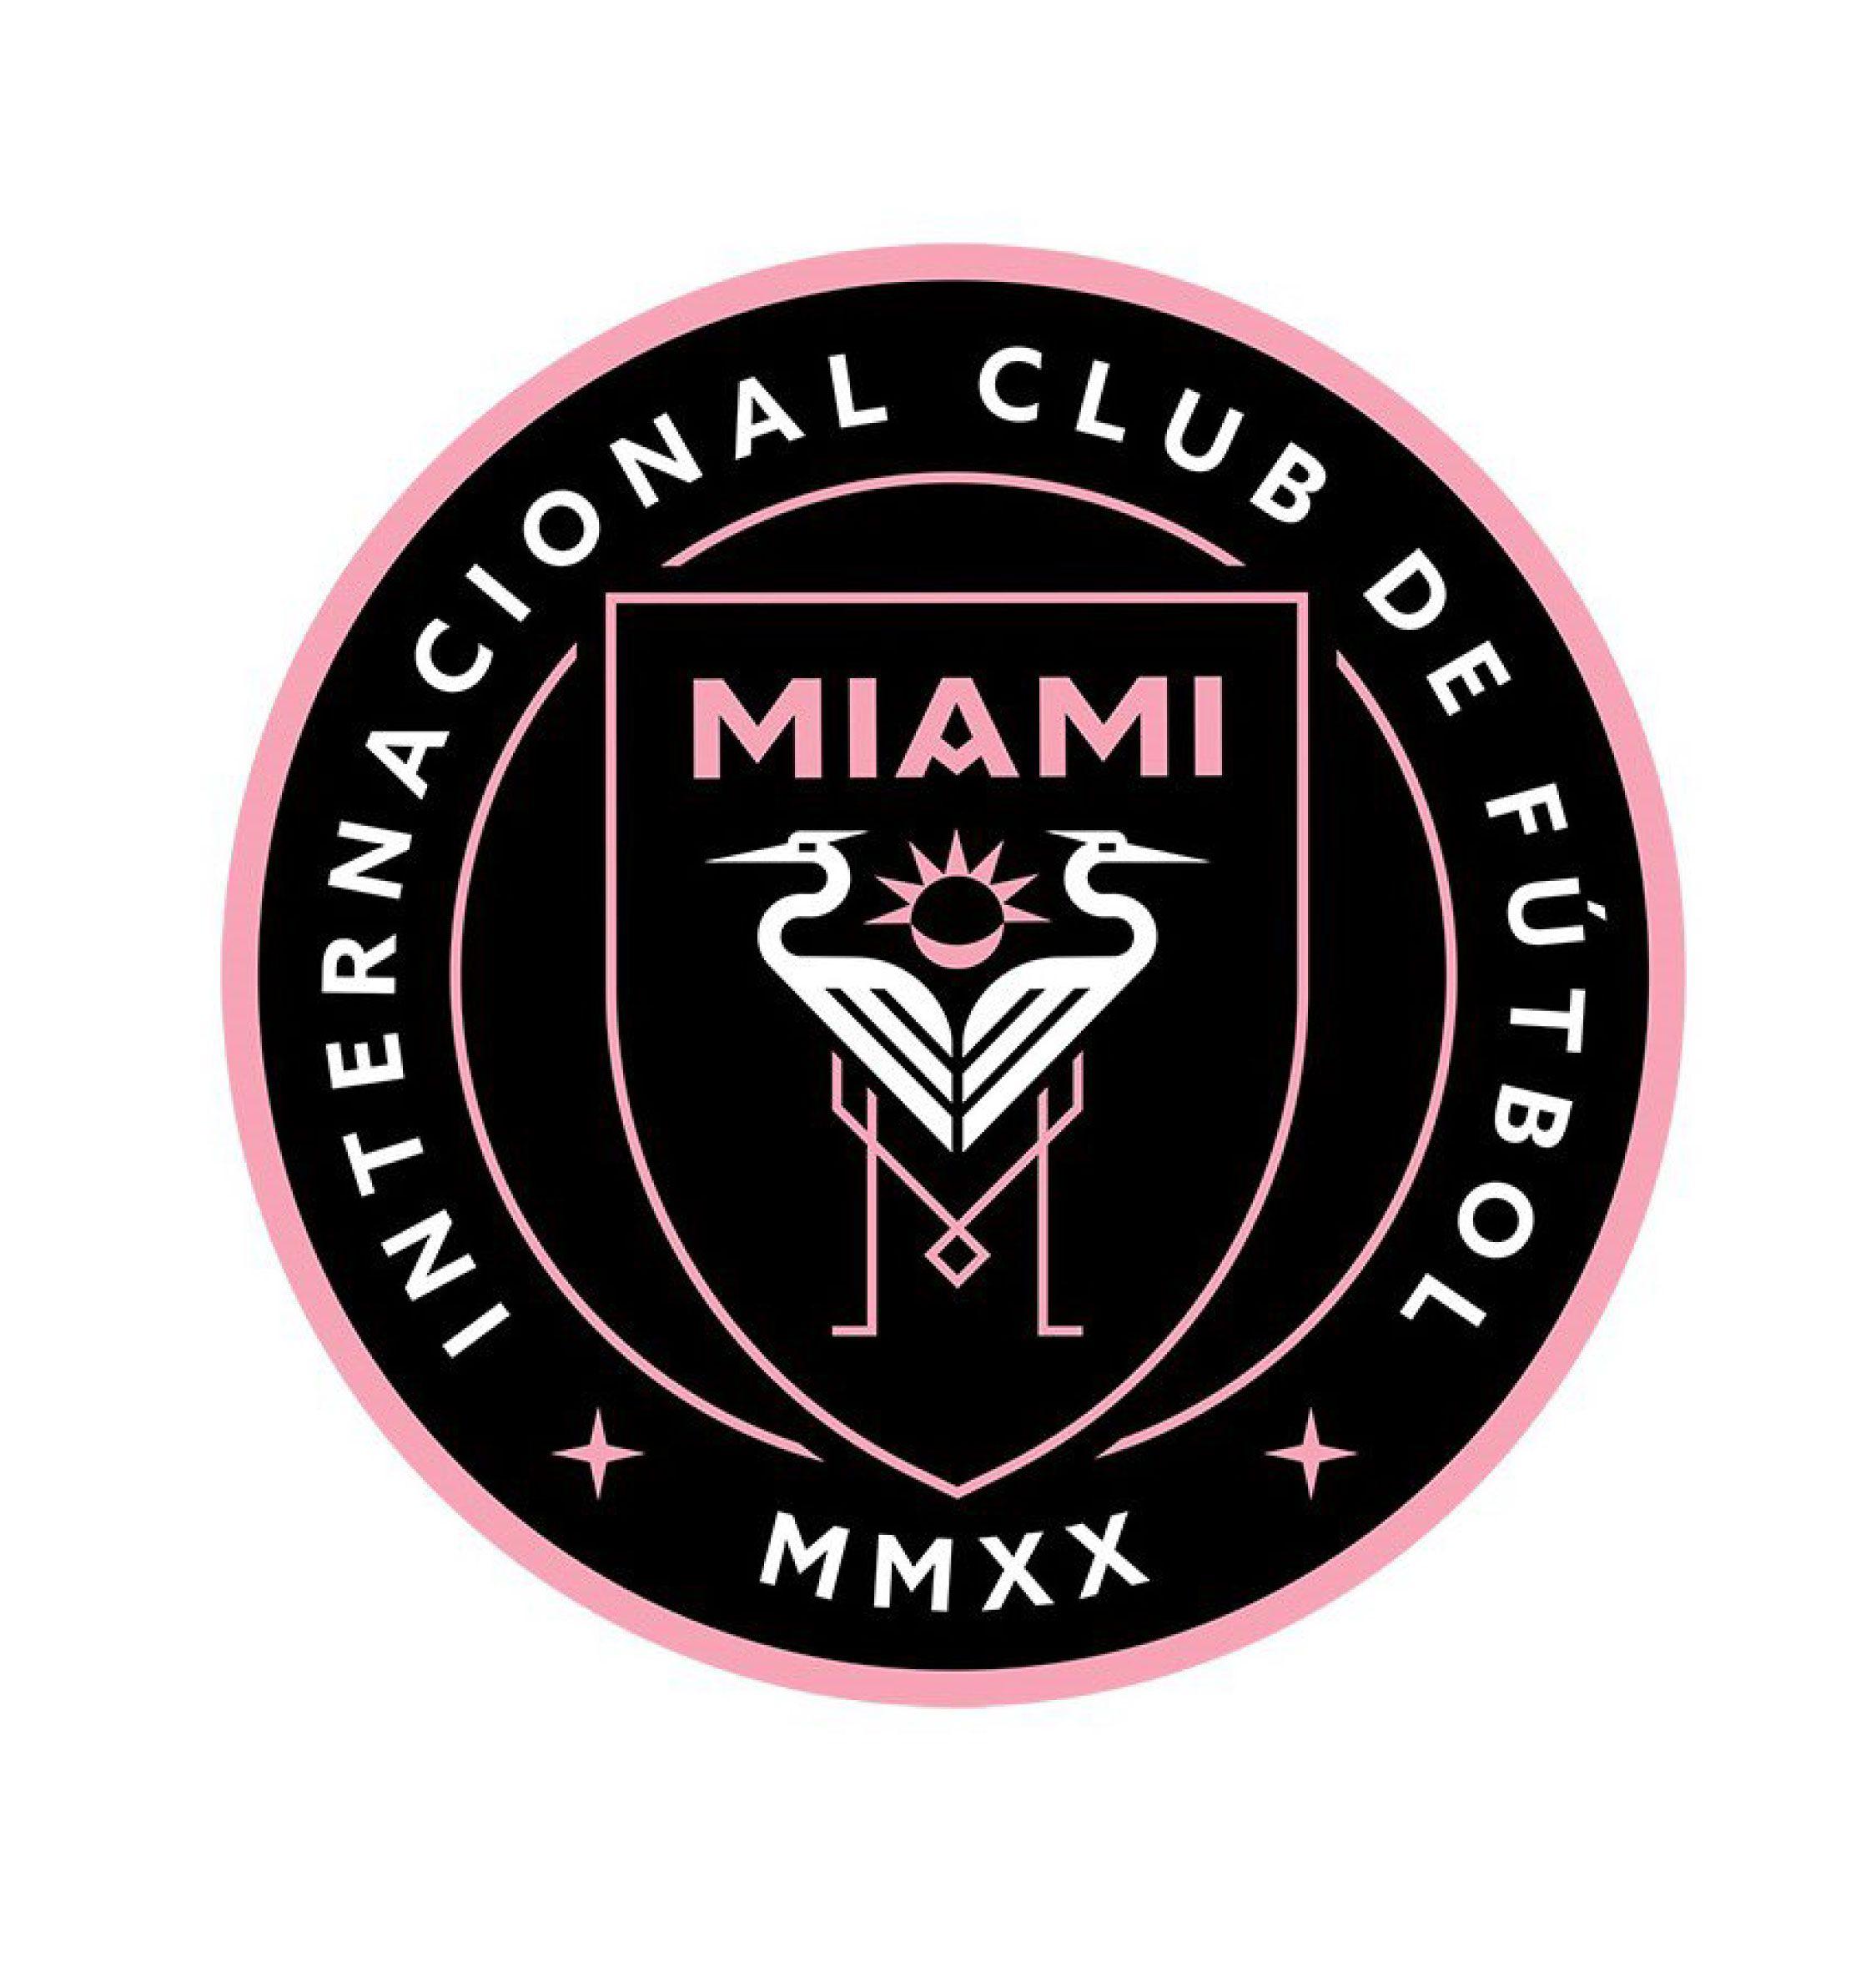 Football Club Logo - Could this be the new logo for David Beckham's Miami football club ...